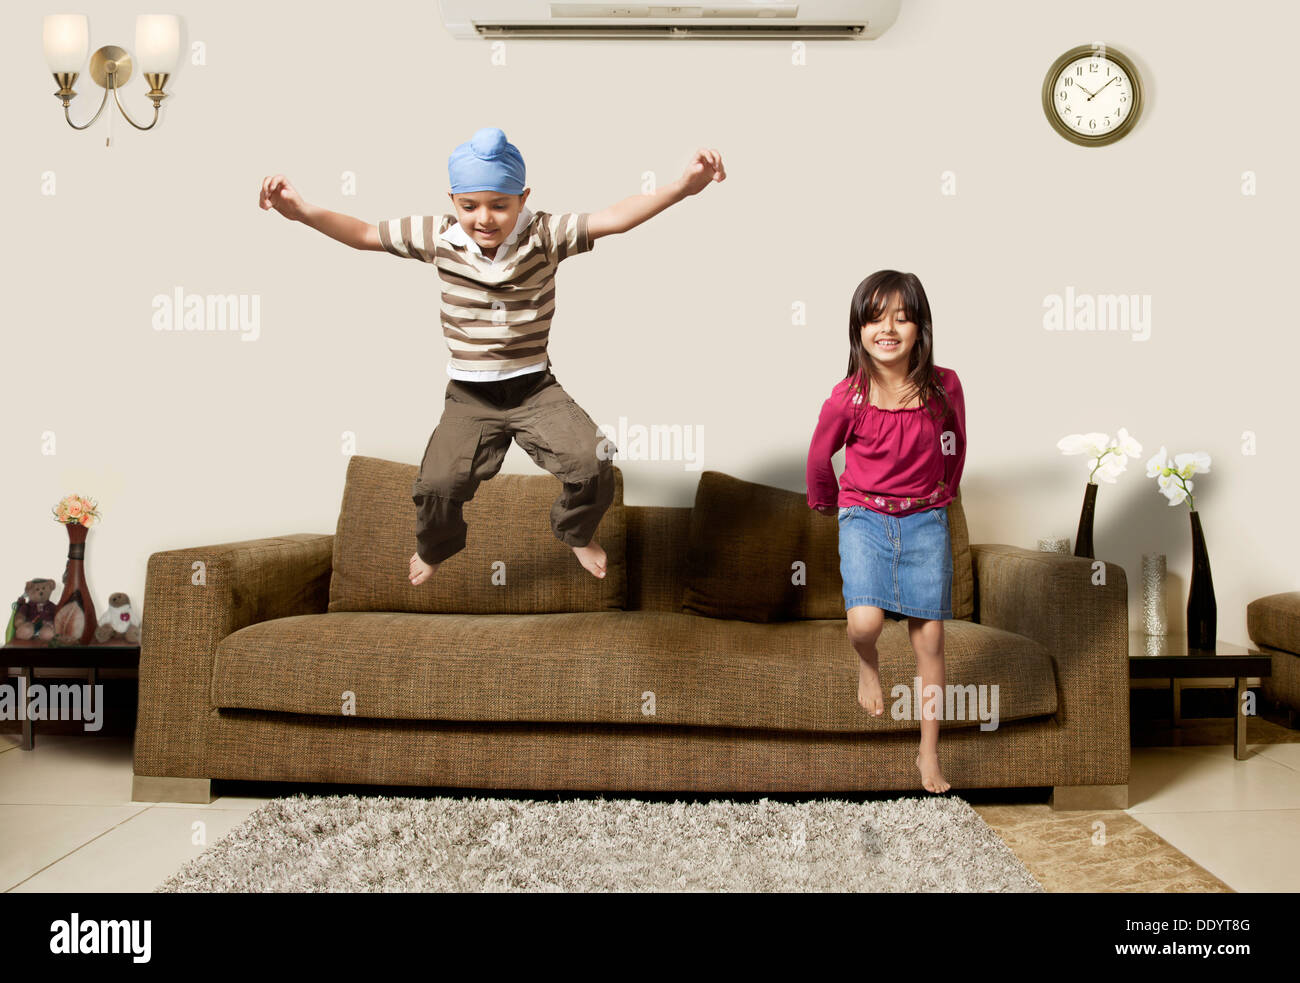 Playful little kids having fun playing at home Stock Photo